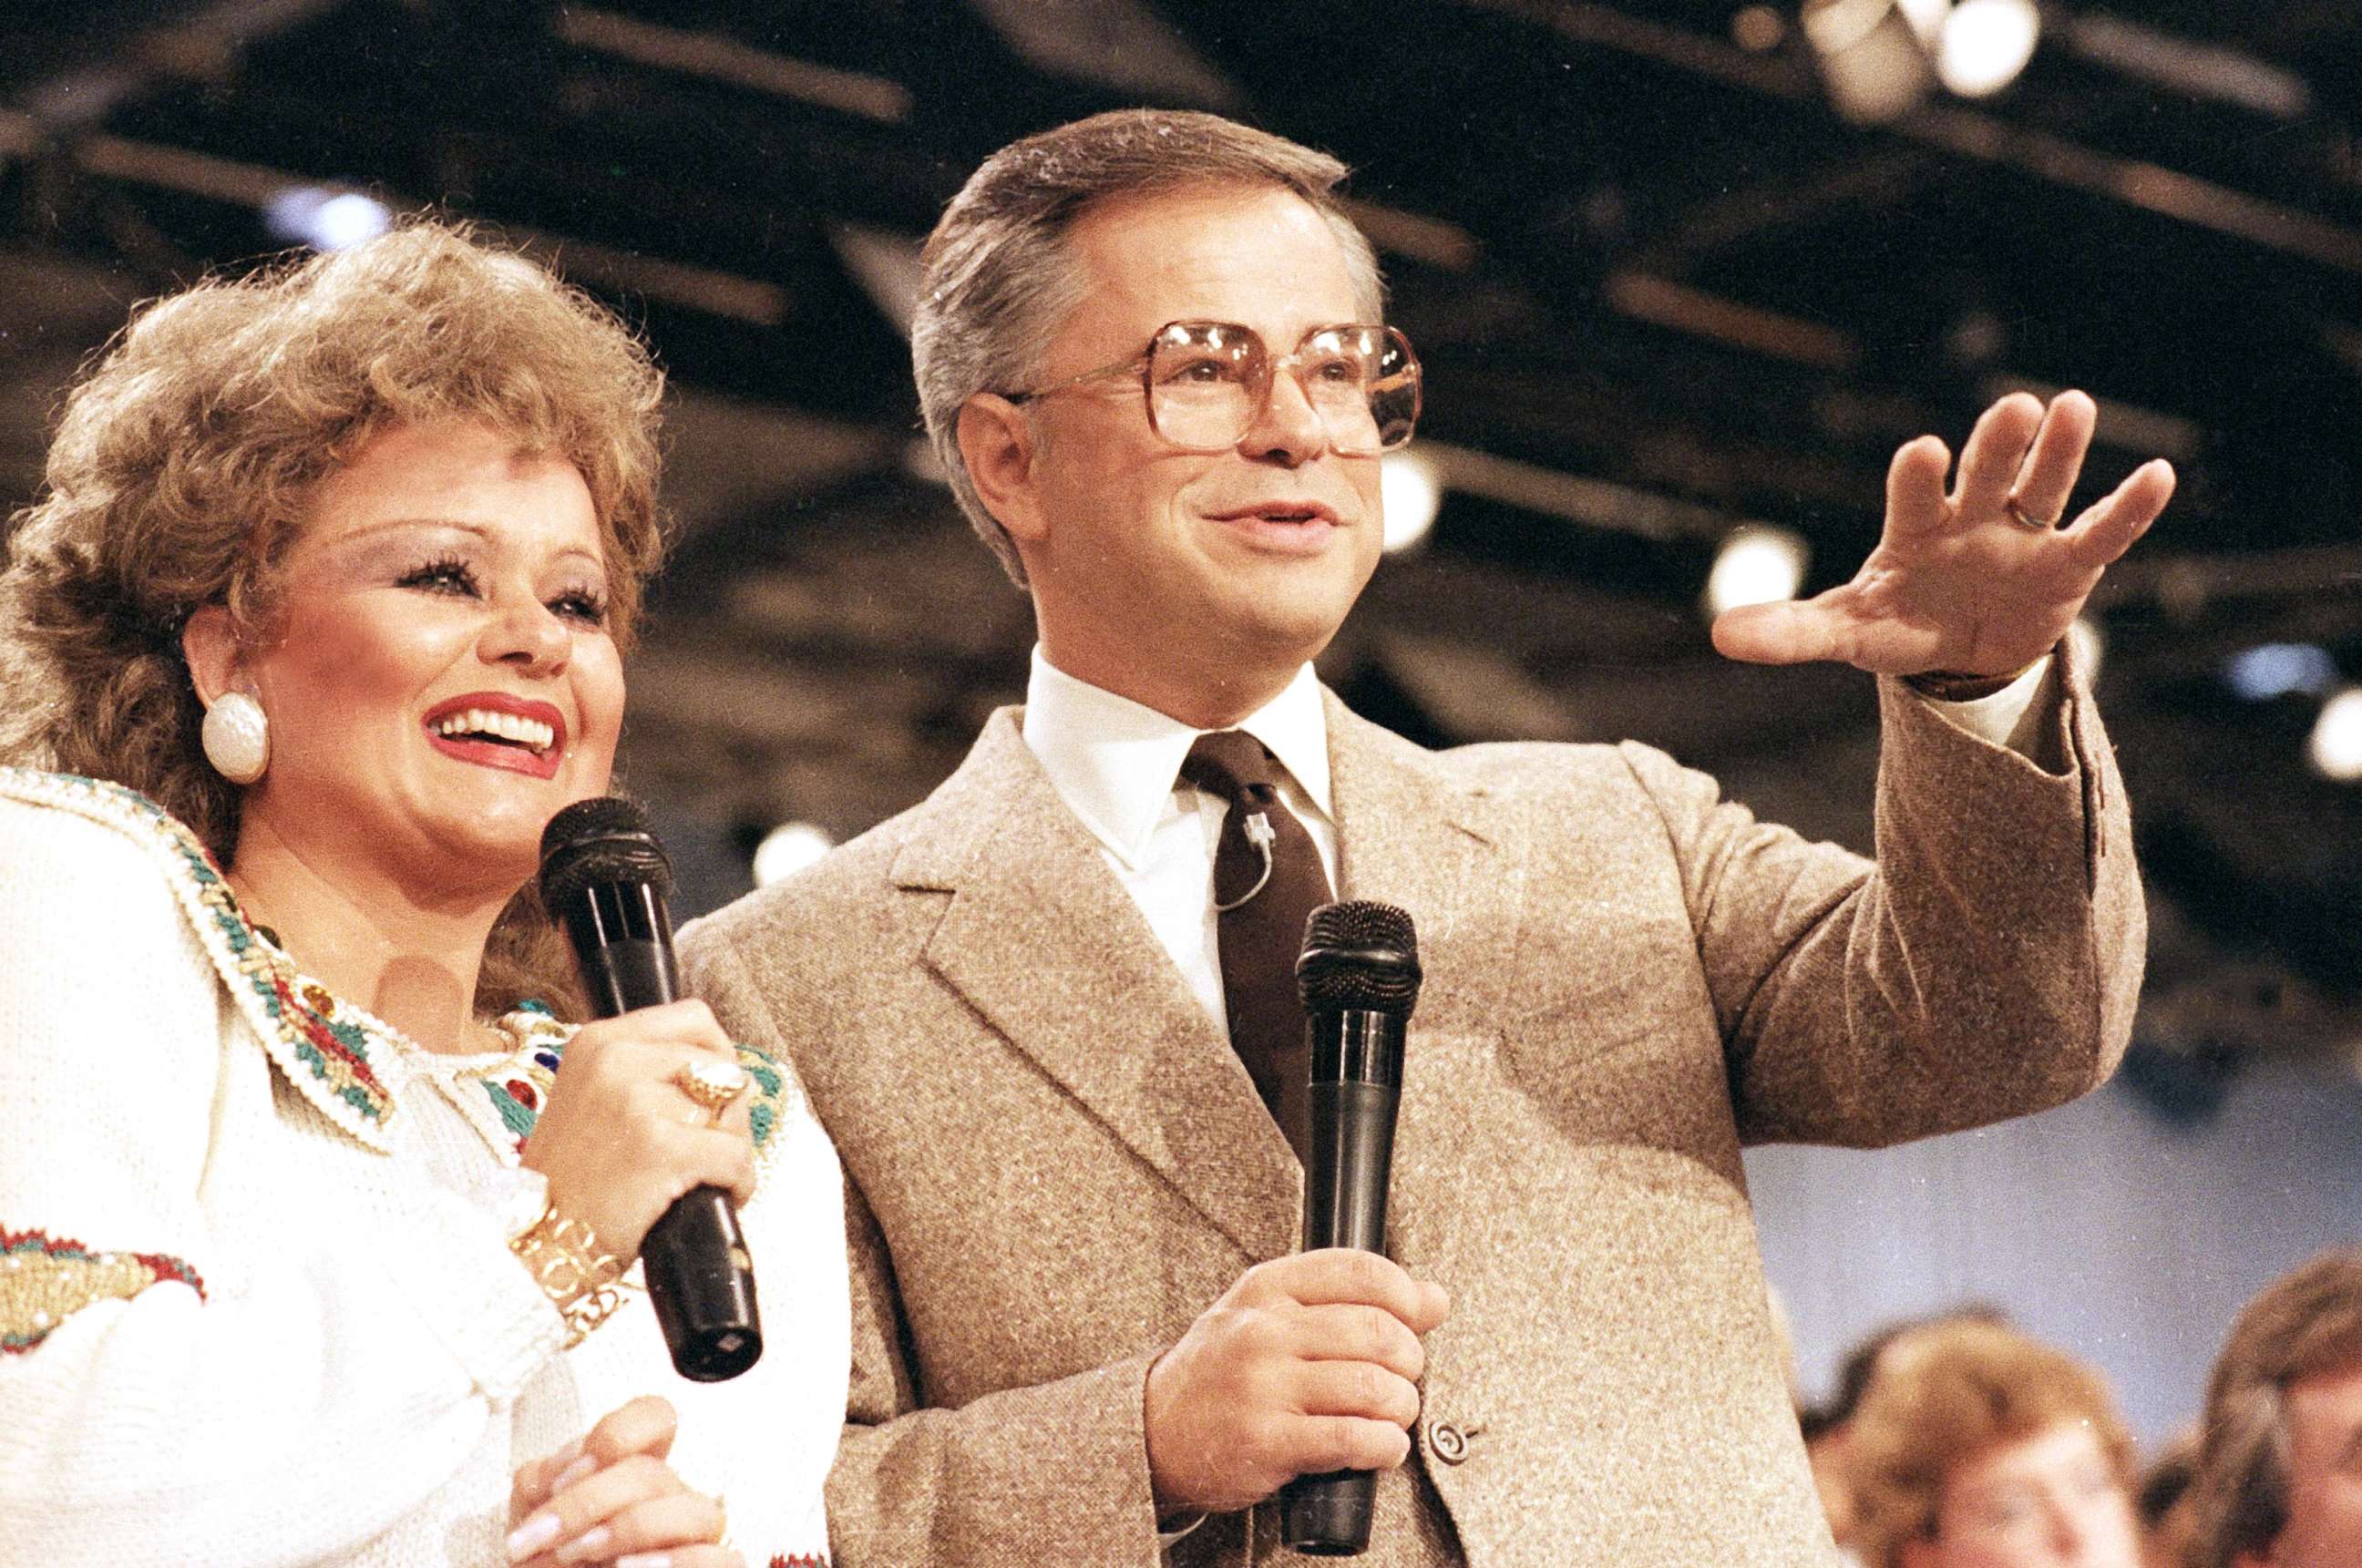 The scandals that brought down the Bakkers, once among USs most famous televangelists